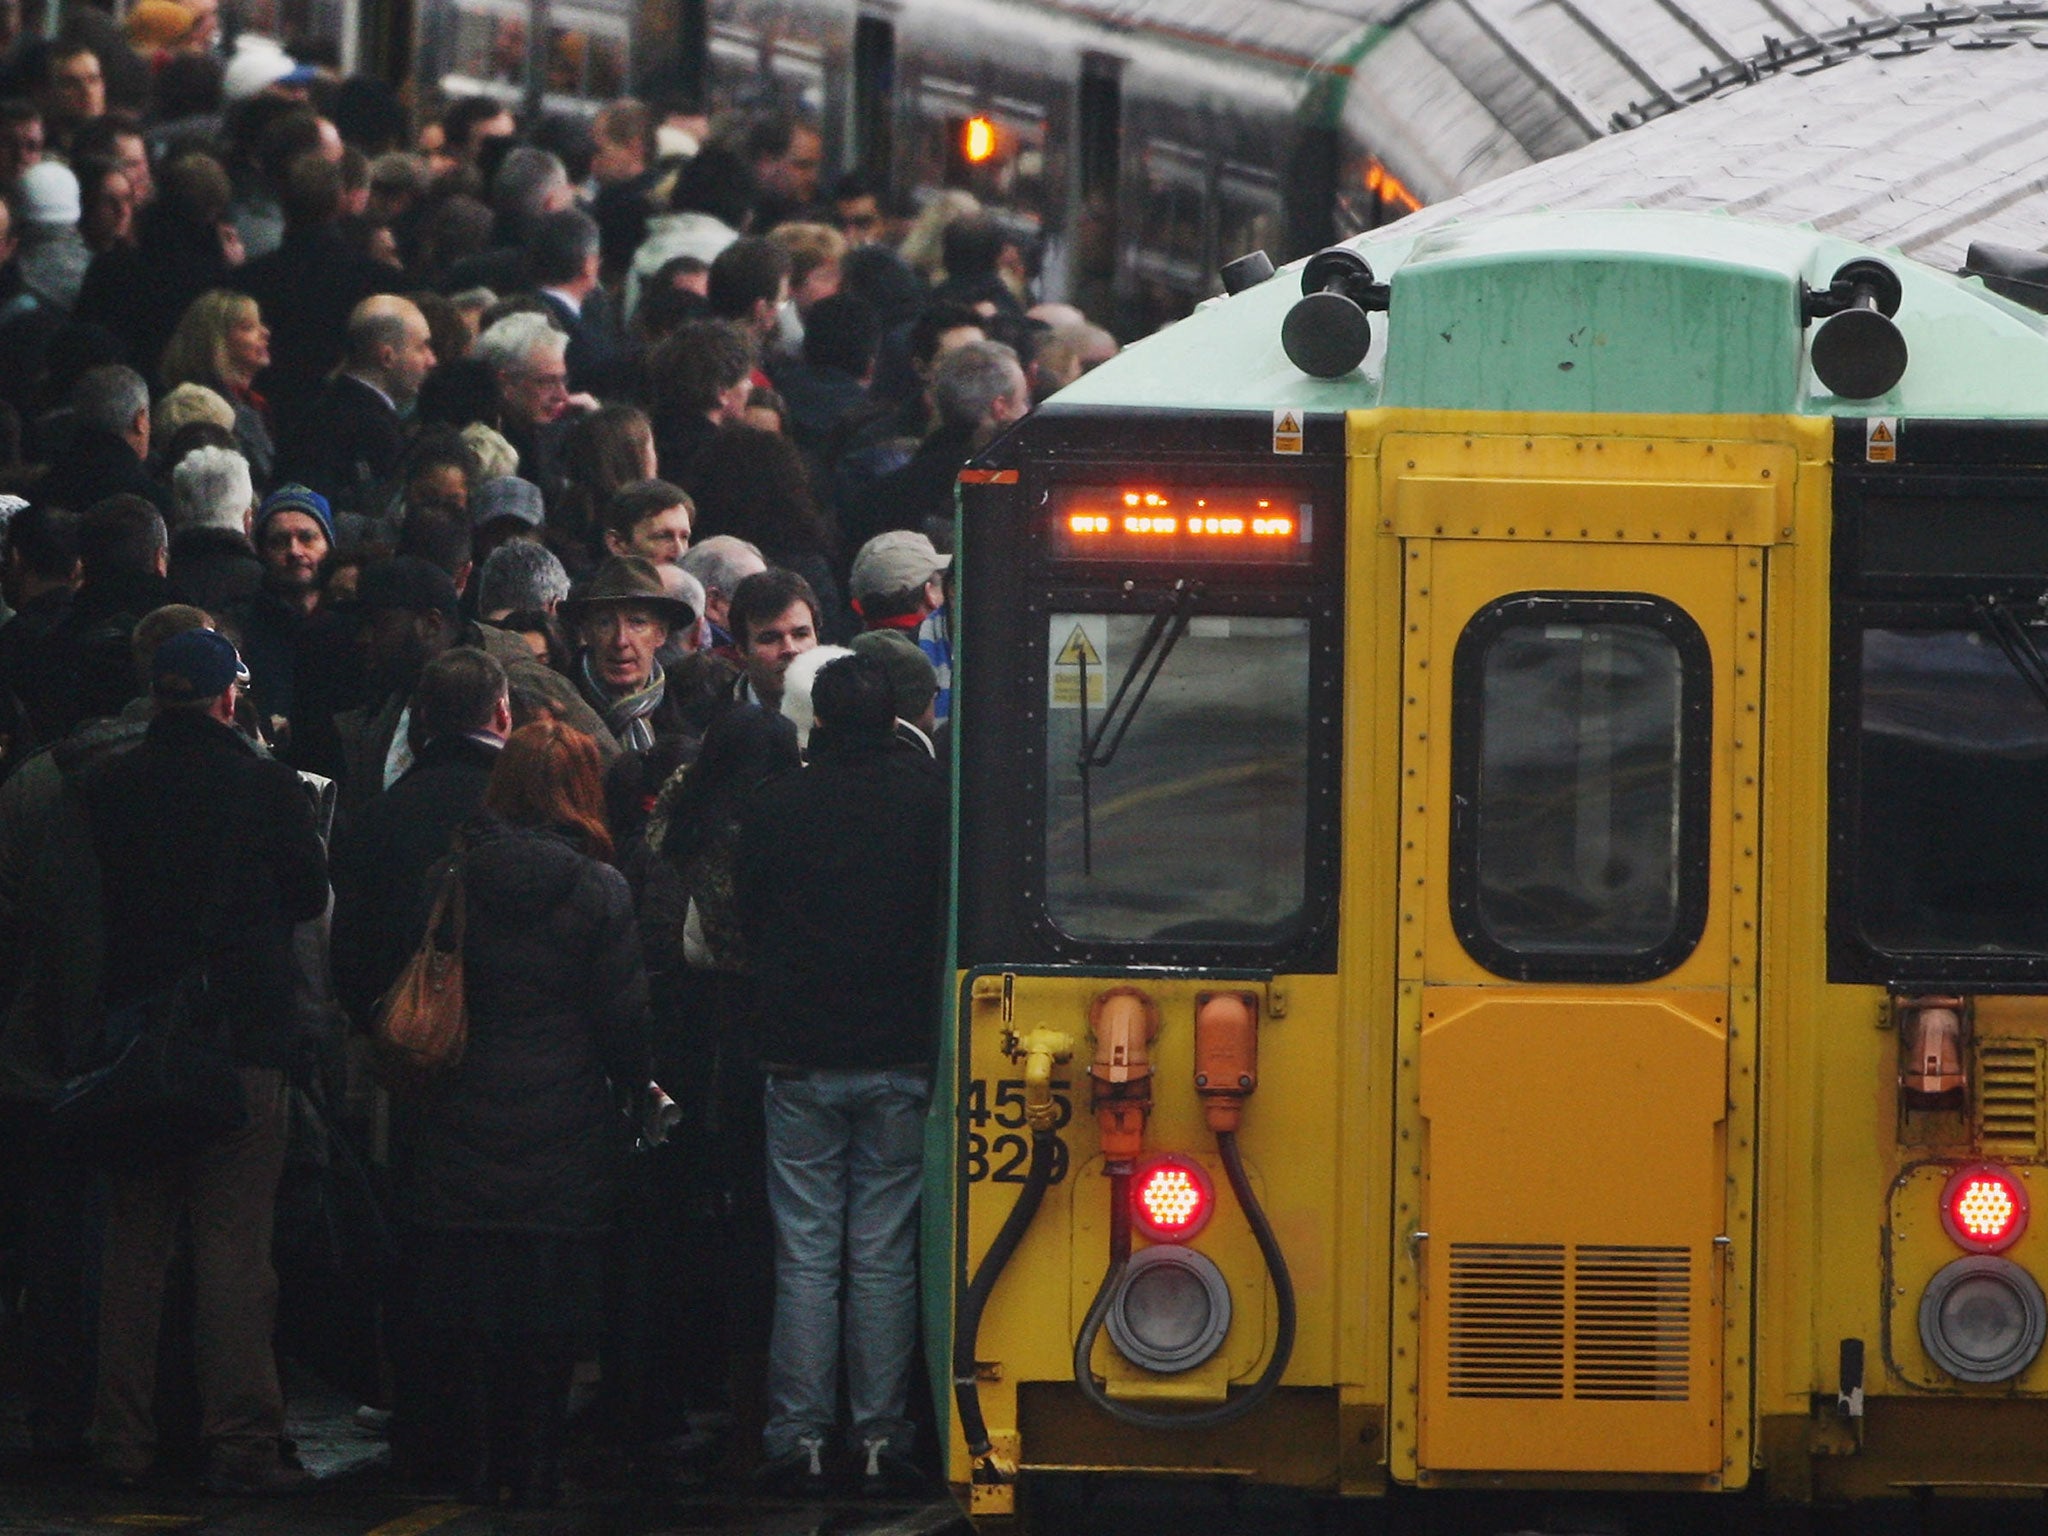 Thousands of commuters were delayed